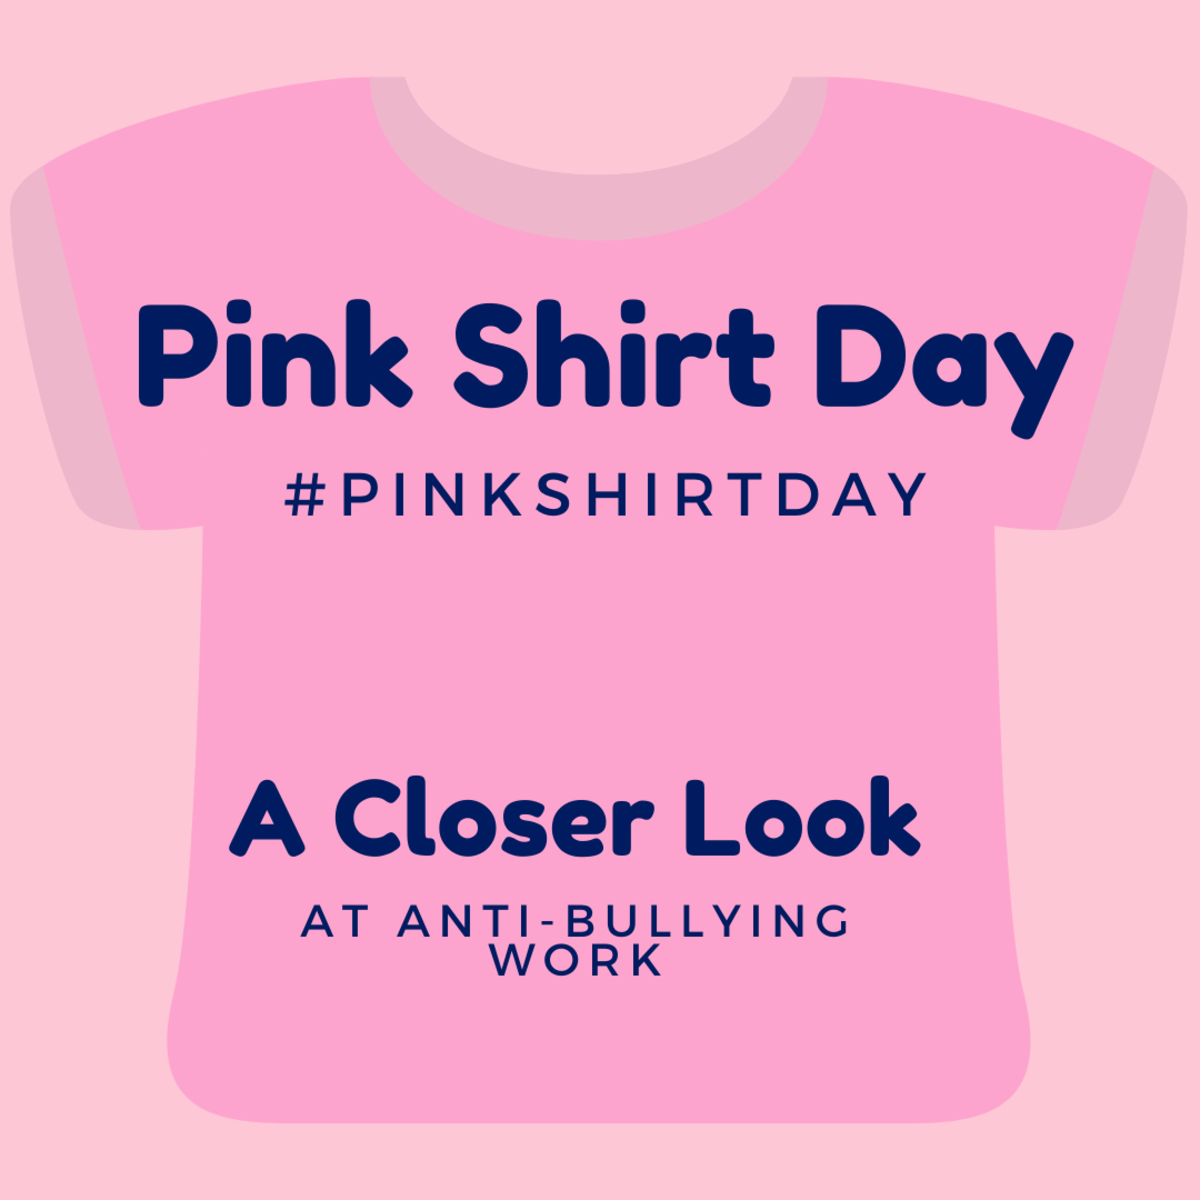 Is #PinkShirtDay Effective?